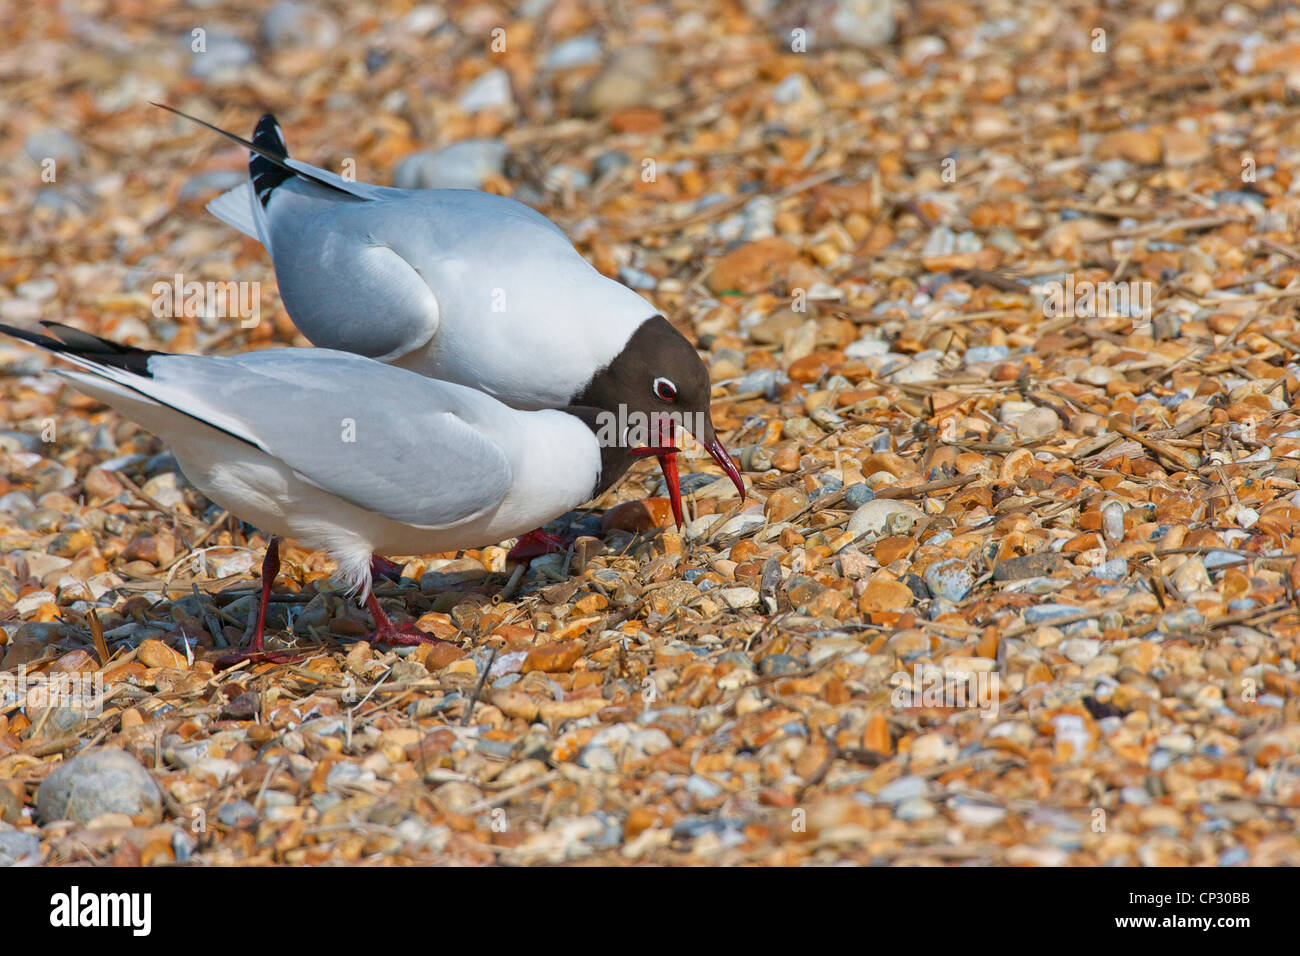 Black headed Gull (Chroicocephalus ridibundus) Begging for a meal. It seems to form part of the breeding and courtship ritual. Stock Photo